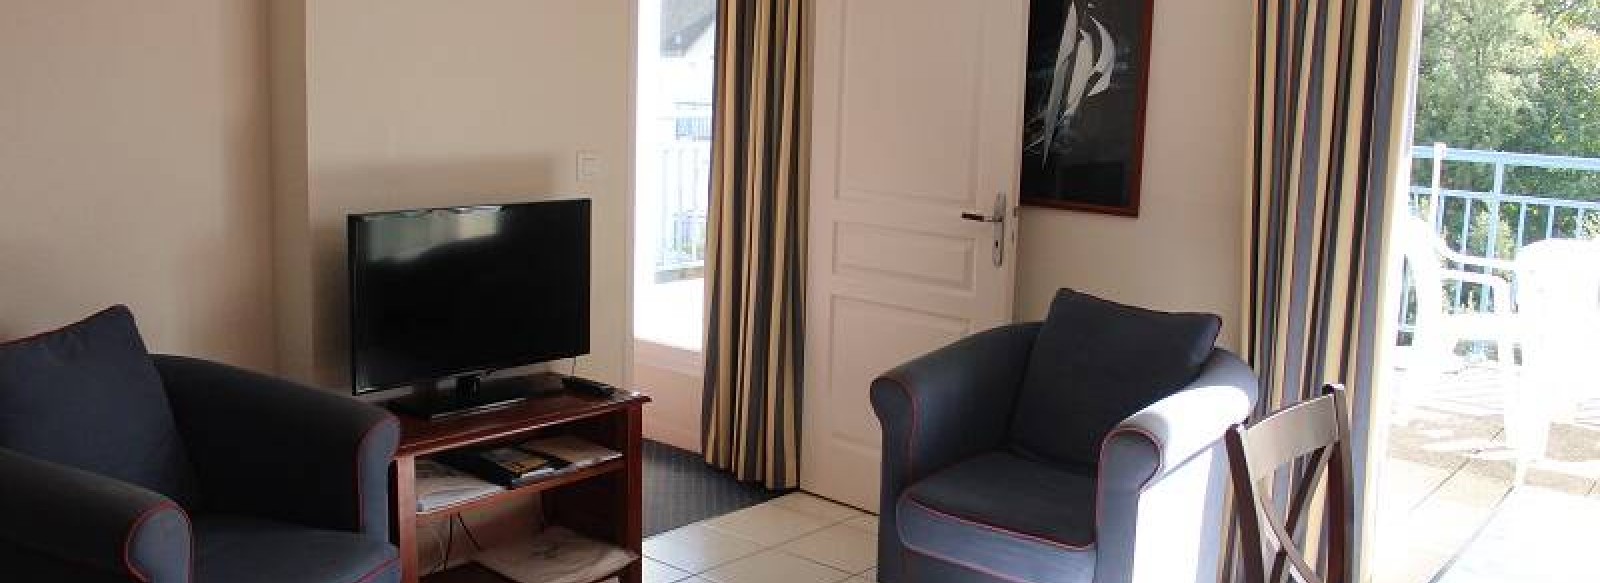 Appartement 6 personnes * - THOBY Denis